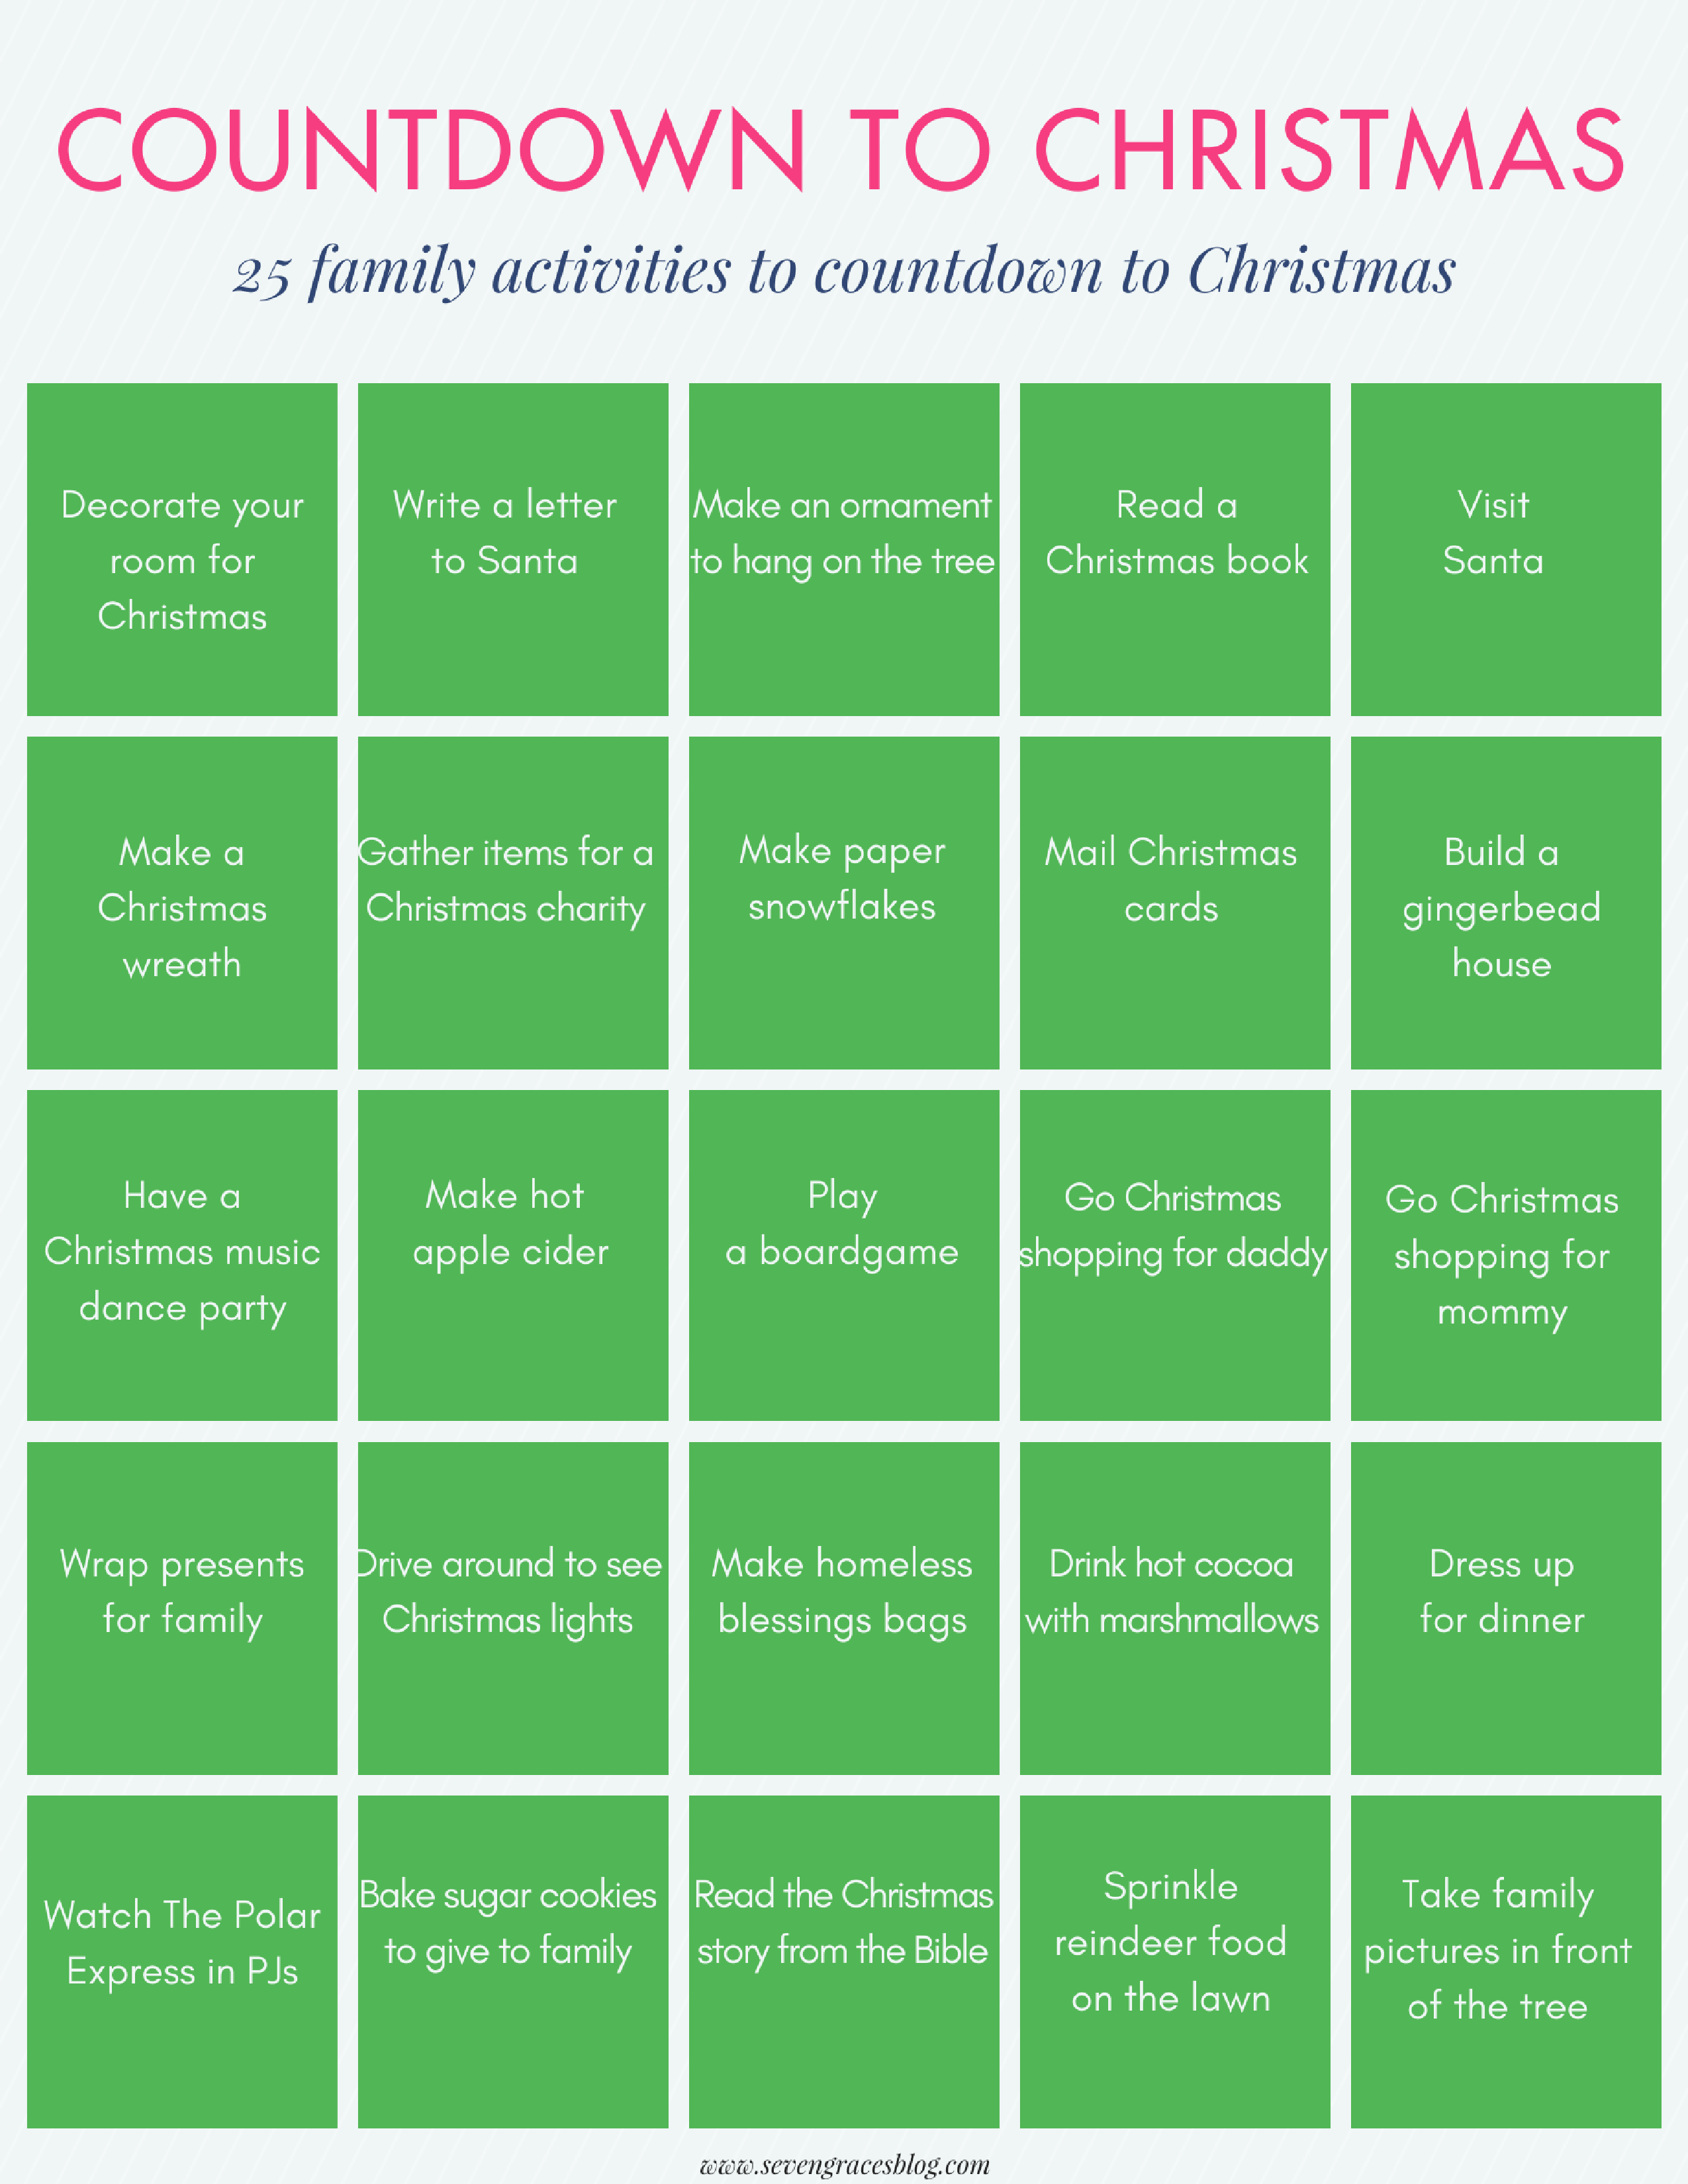 25 fun family activities and traditions to countdown to Christmas. Free printable in both regular and legal size paper. These are too cute and so much fun to do with your kids this holiday season!